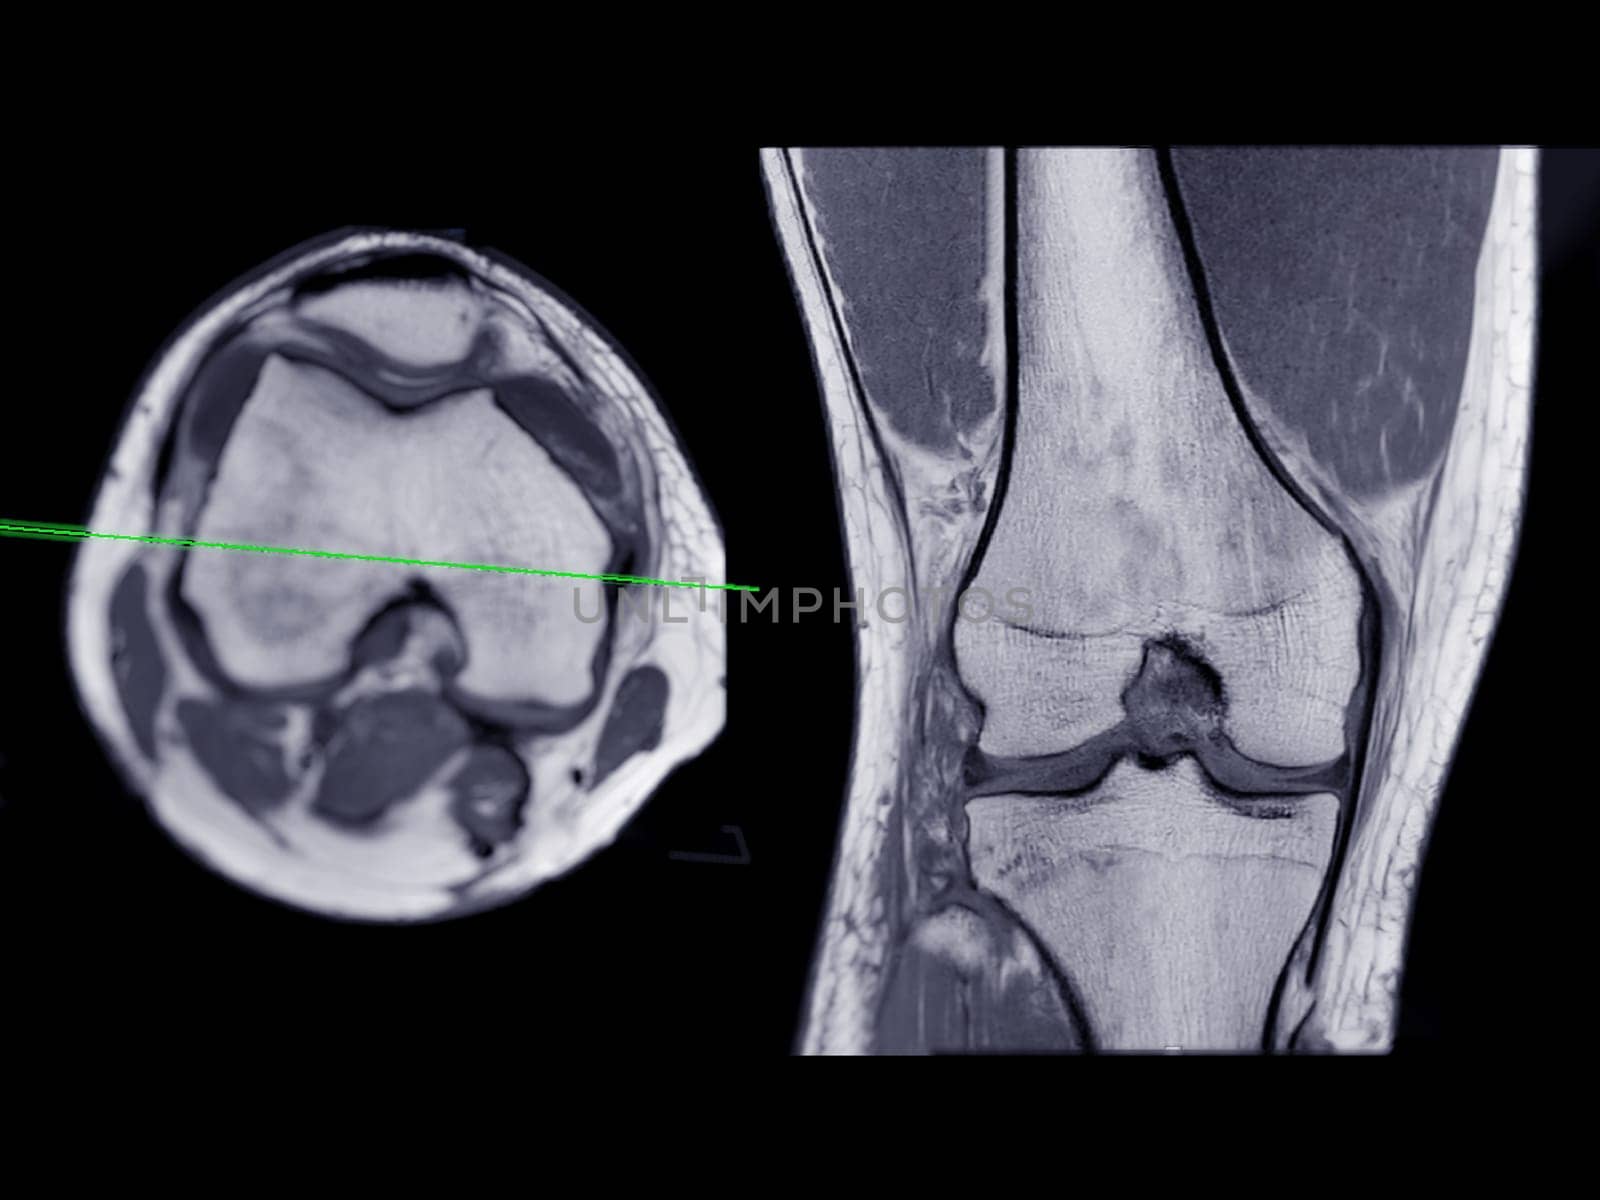 Magnetic resonance imaging or MRI of  knee joint Axial T2  and Coronal view for detect tear or sprain of the anterior cruciate  ligament (ACL) by samunella